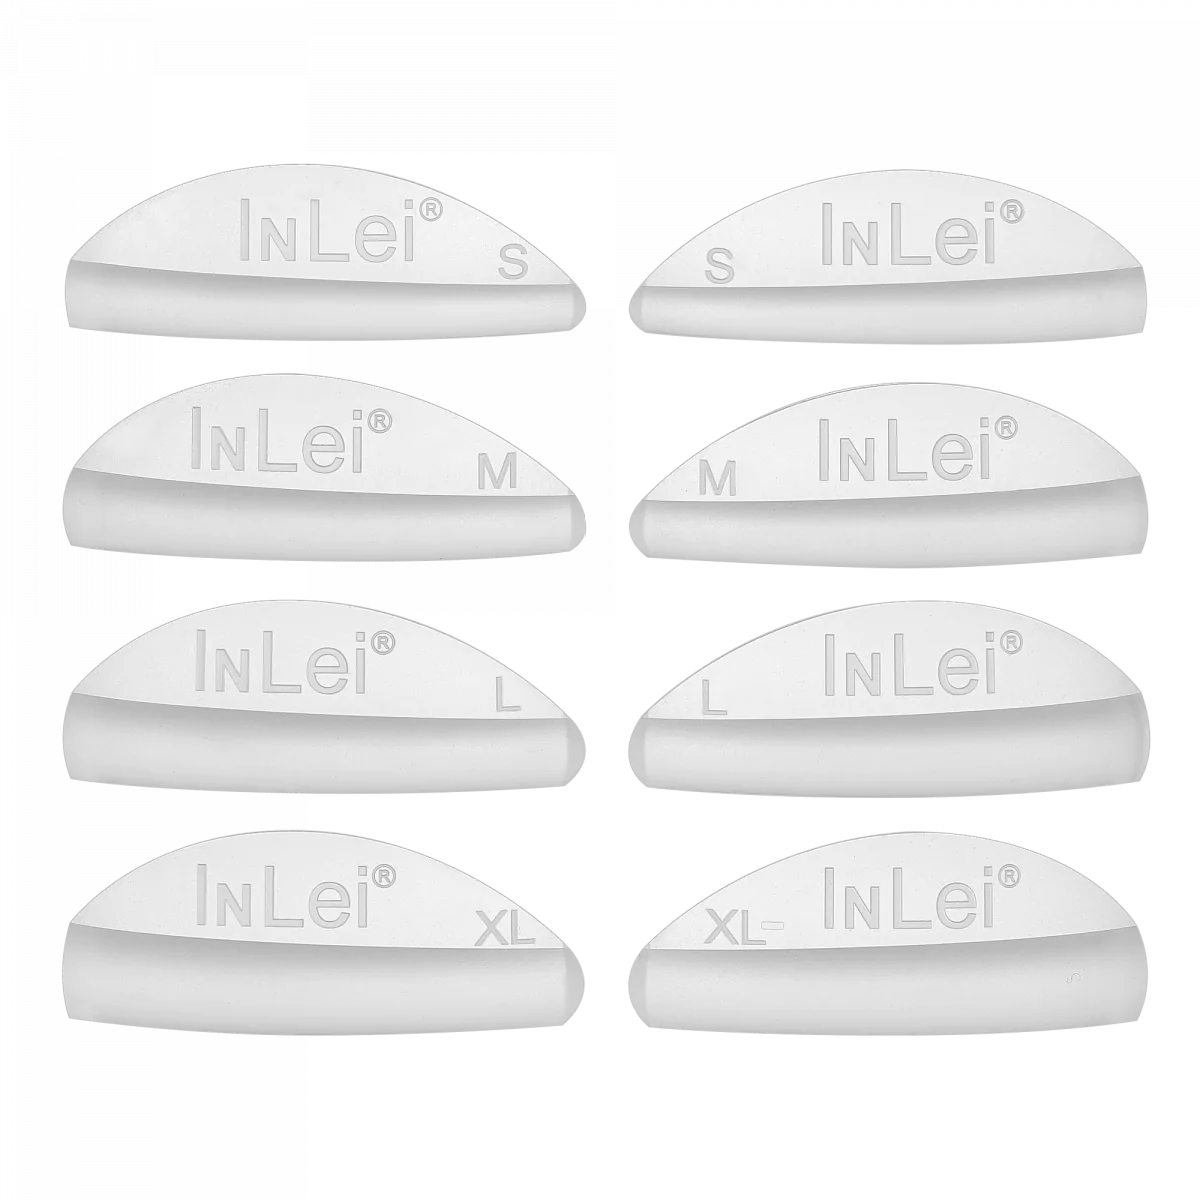 INLEI - ONLY - Silicone Shields (Dolly Effect) Mix of 4 sizes